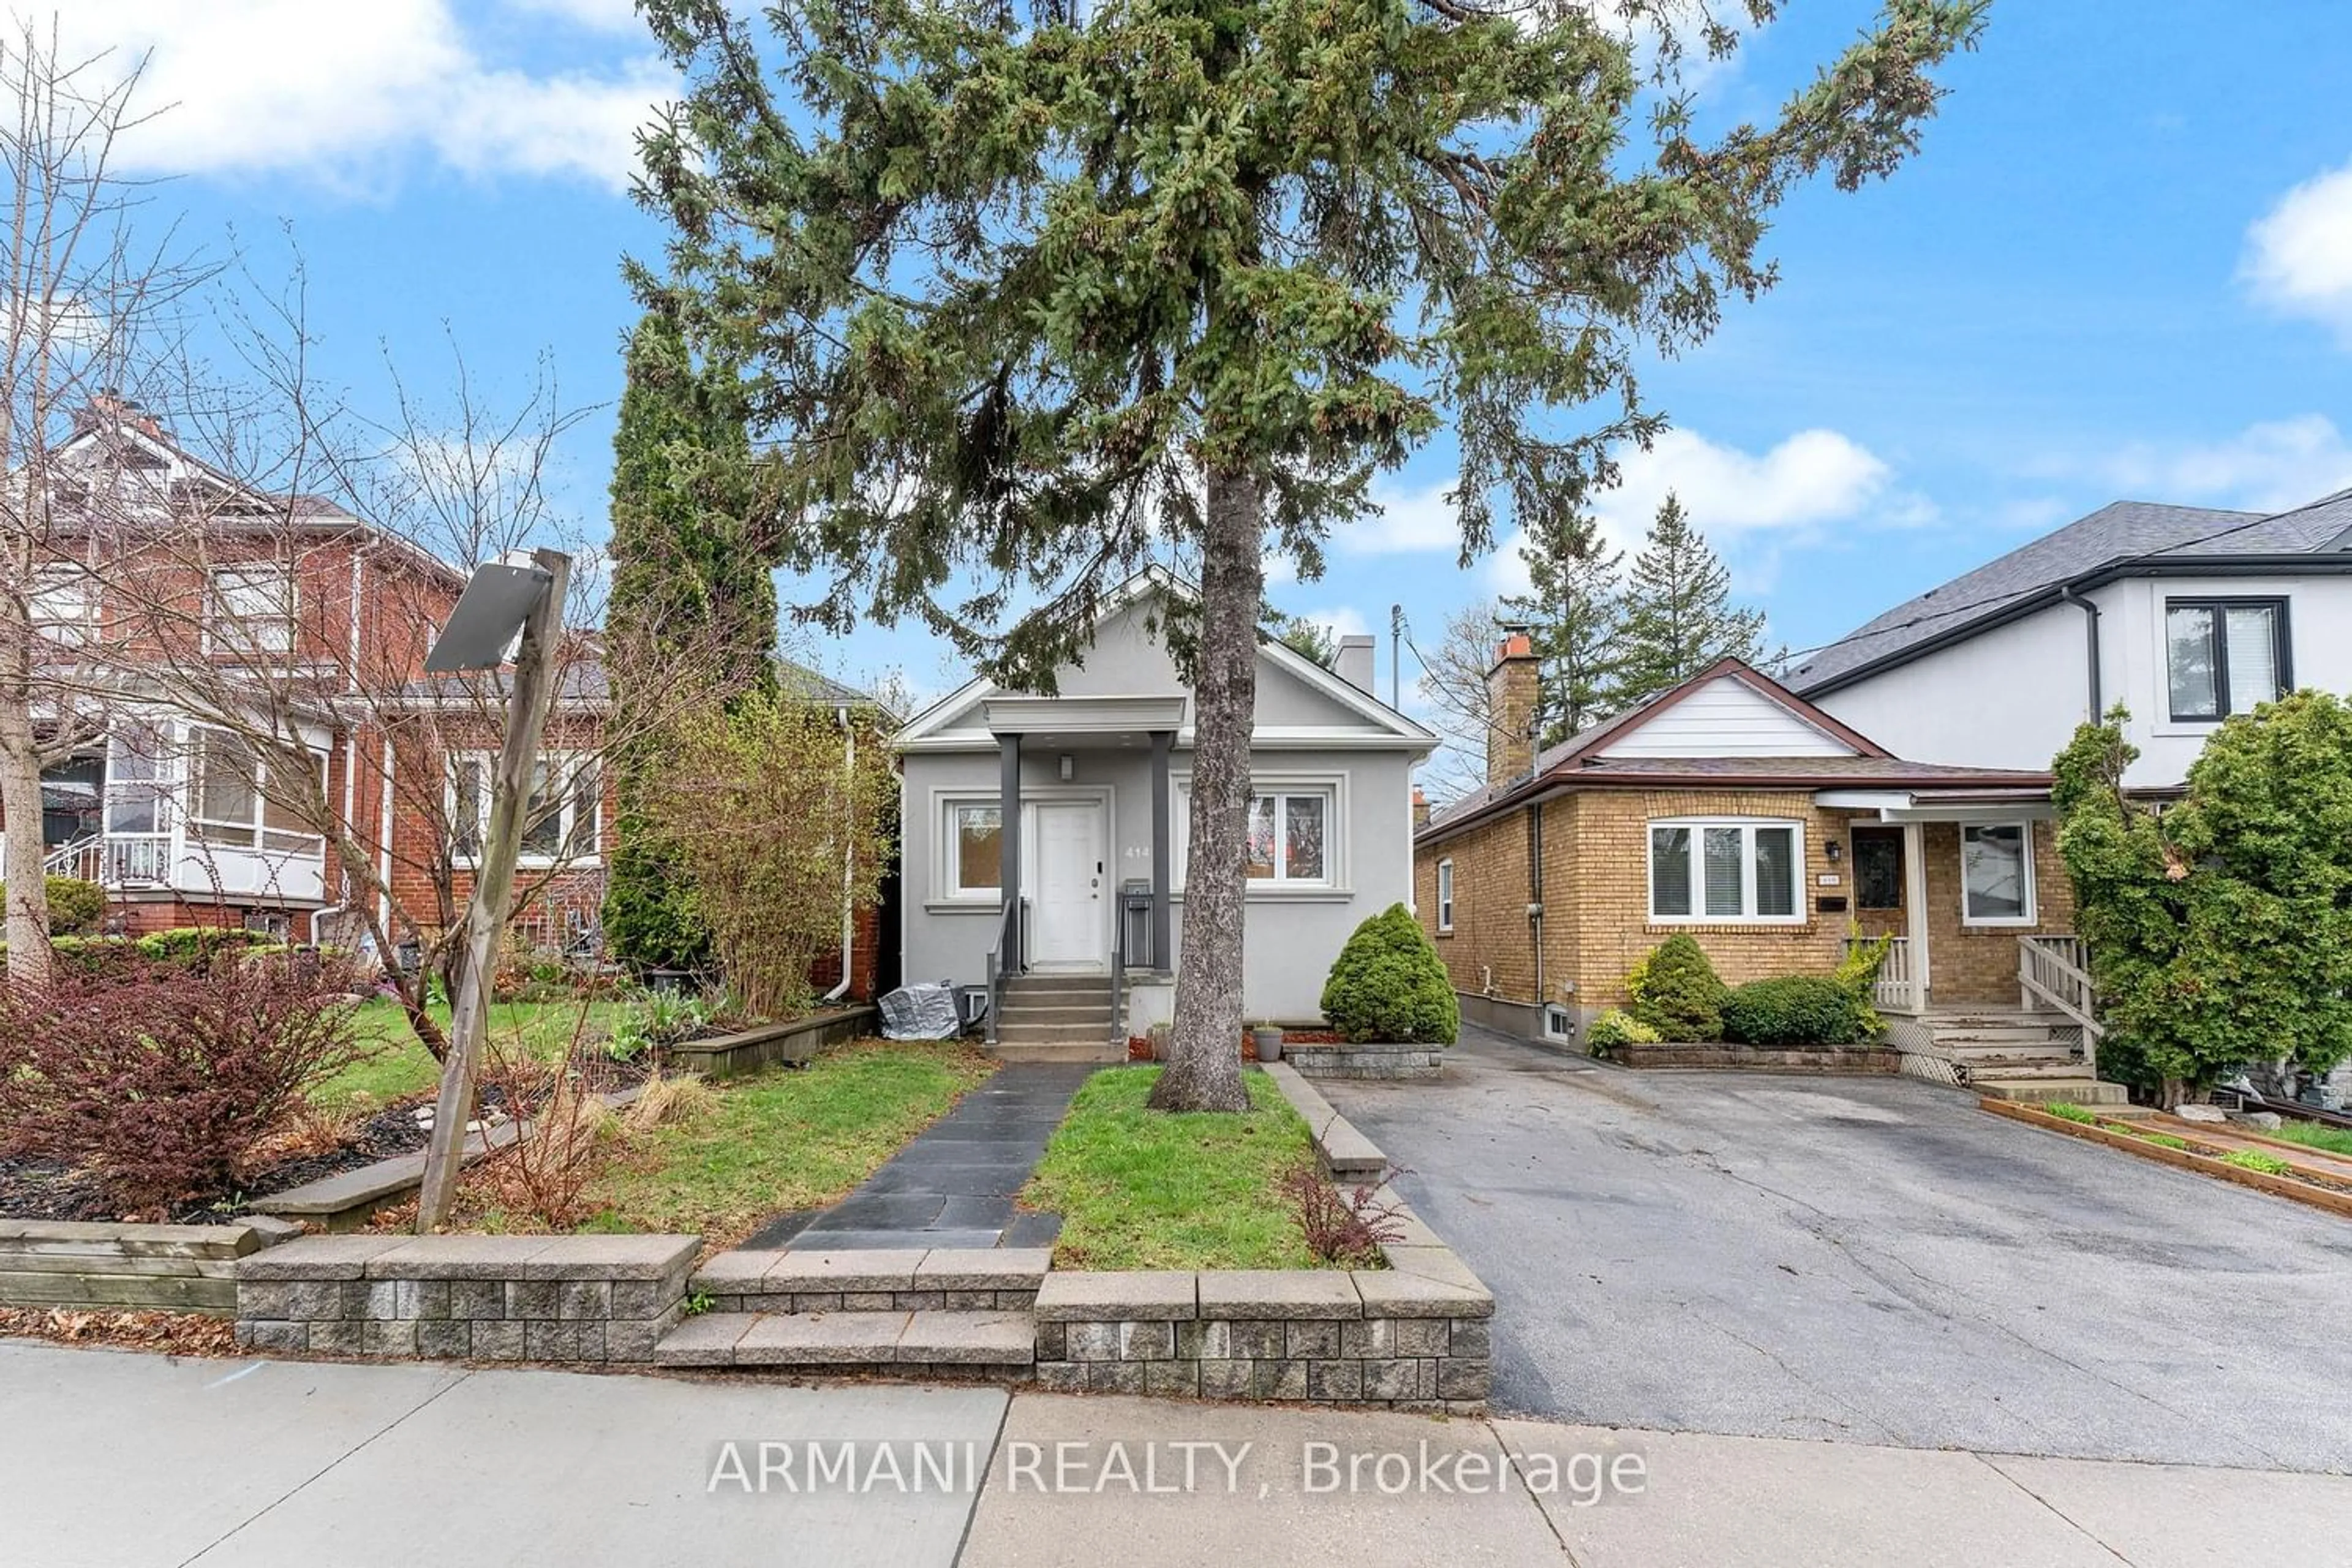 Frontside or backside of a home for 414 Northcliffe Blvd, Toronto Ontario M6E 3L2